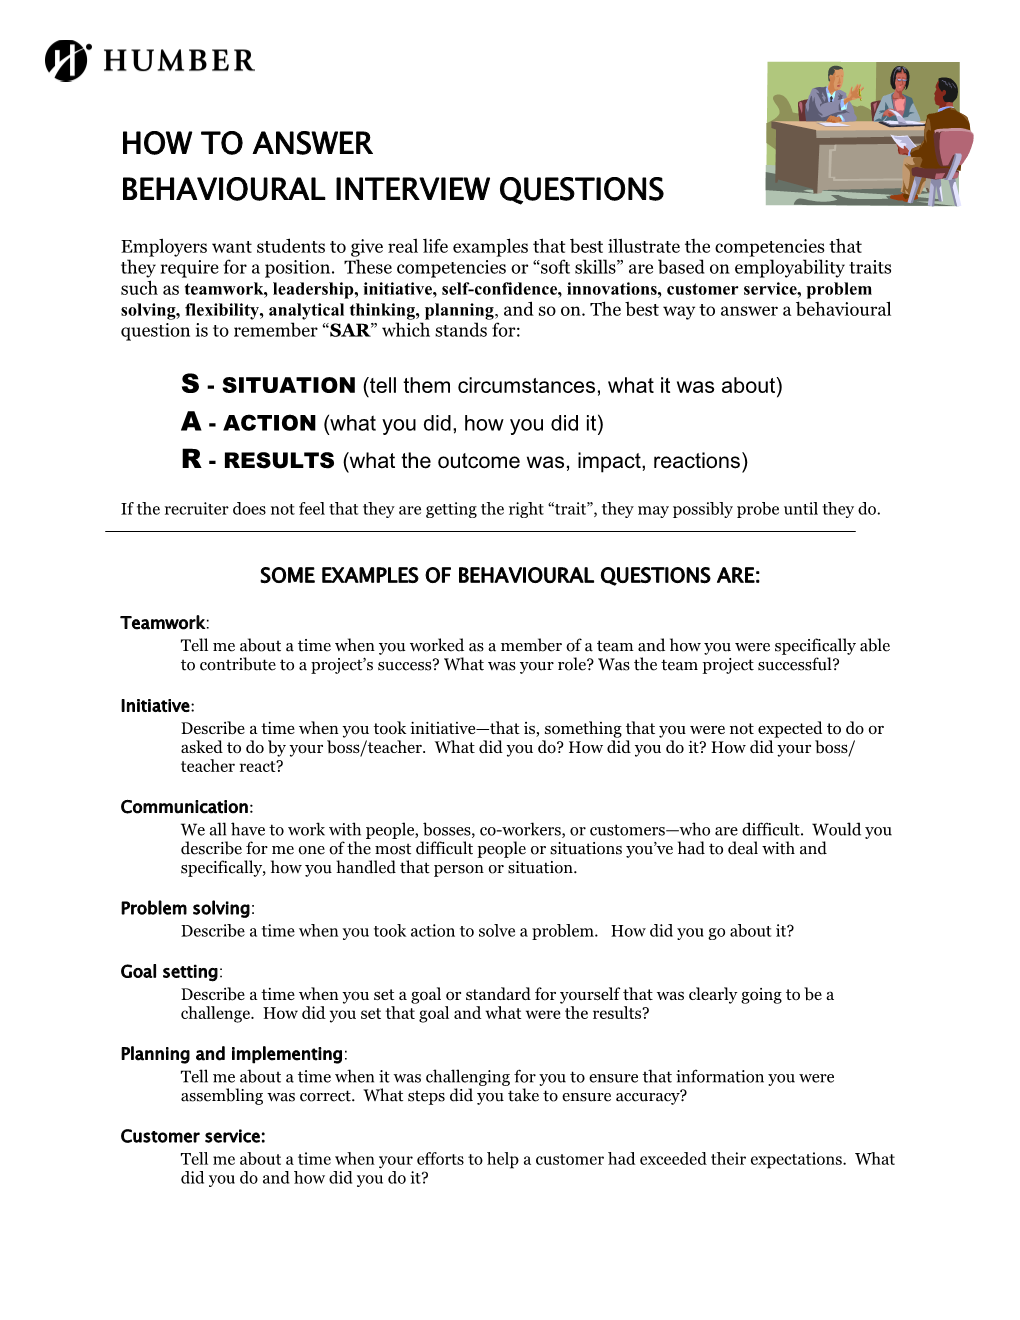 How to Answer Behavioural Interview Questions